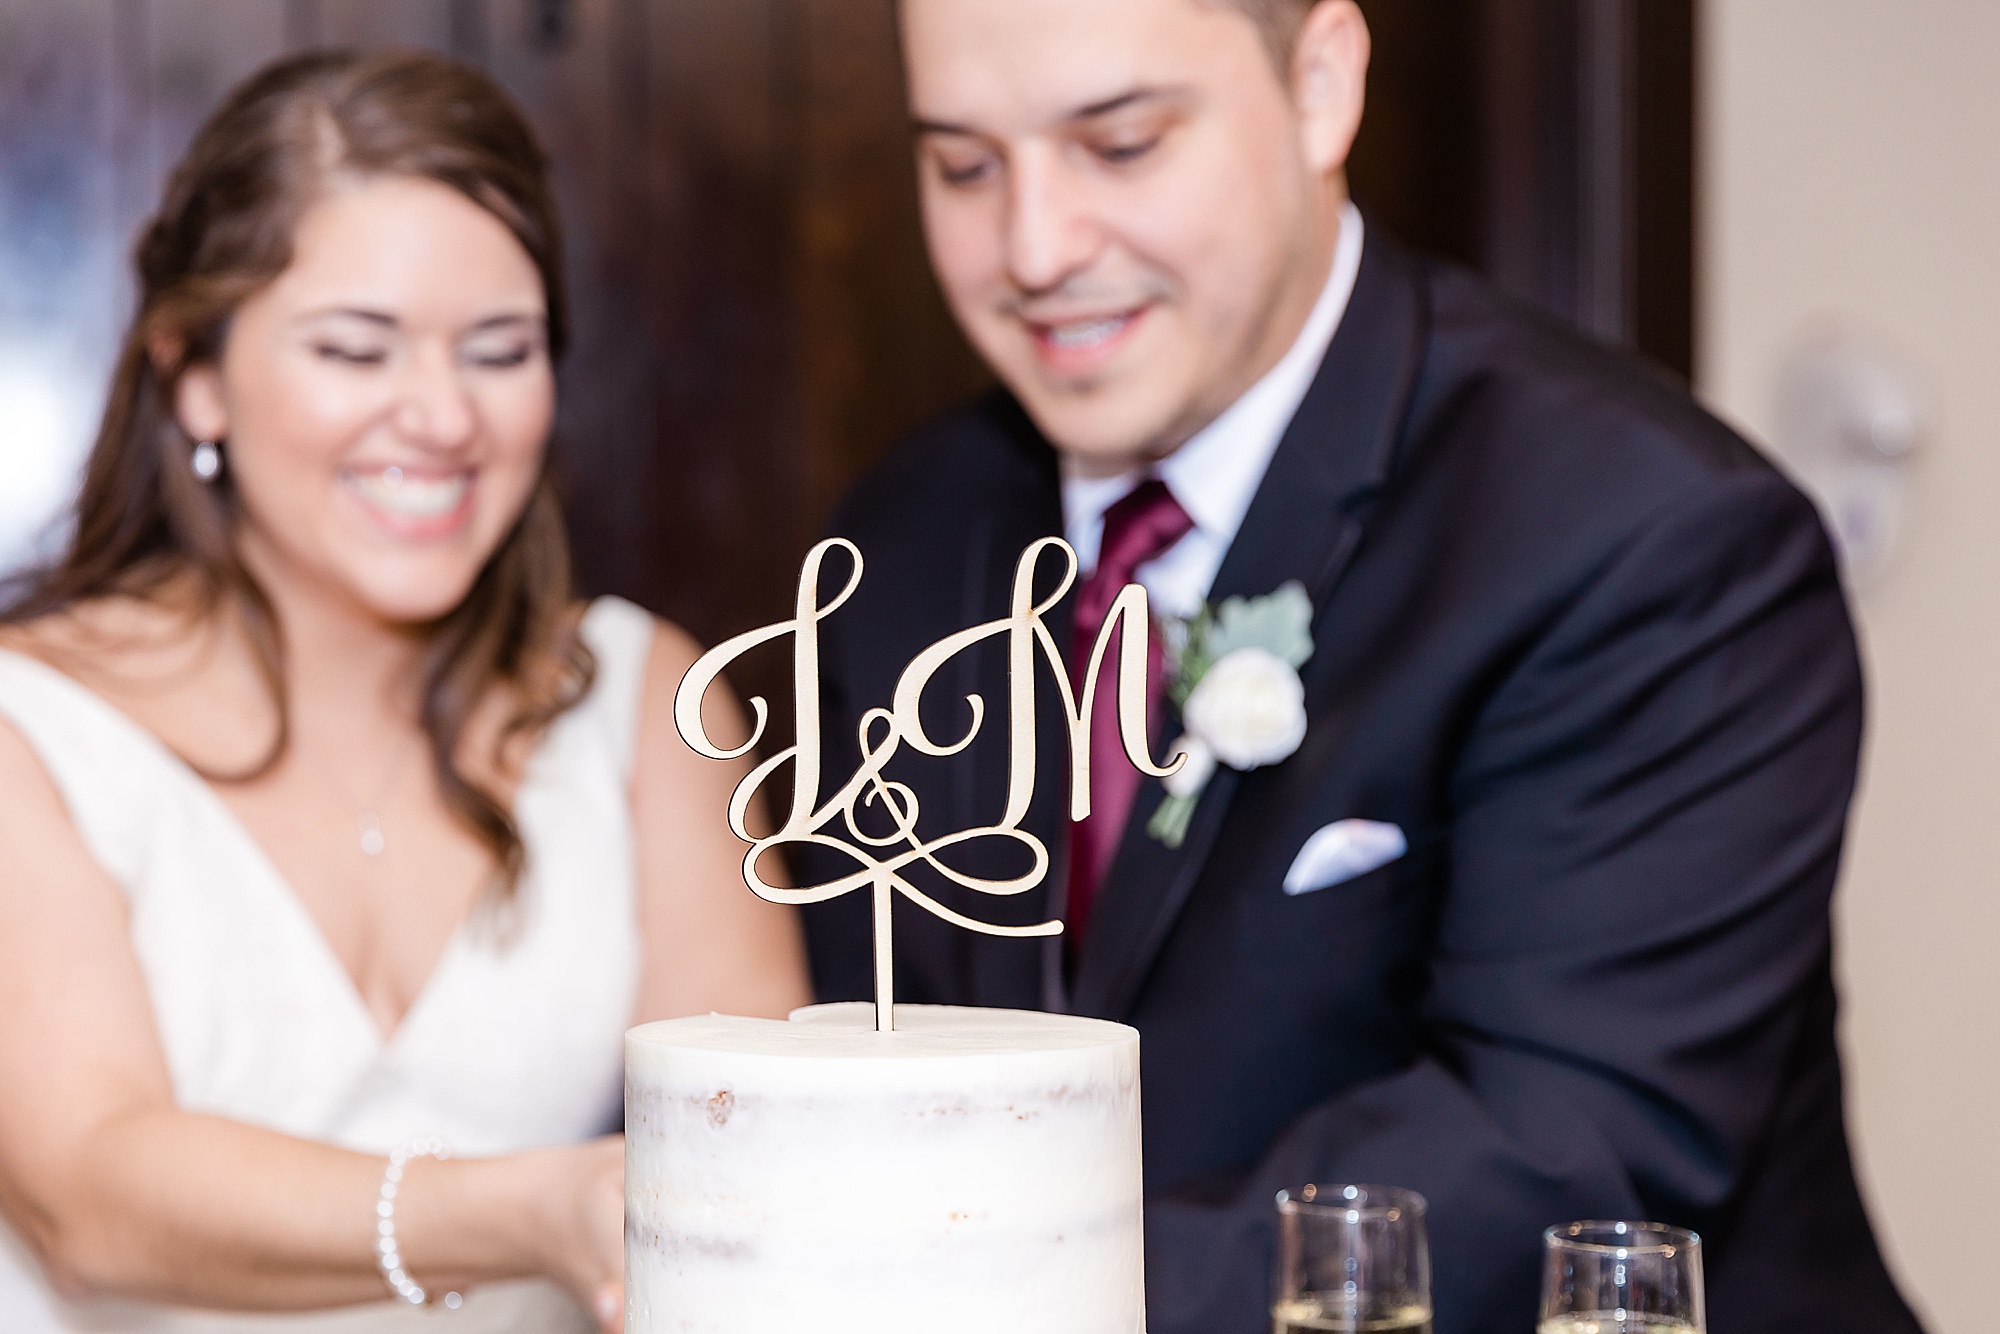 newlyweds cut wedding cake with gold topper 